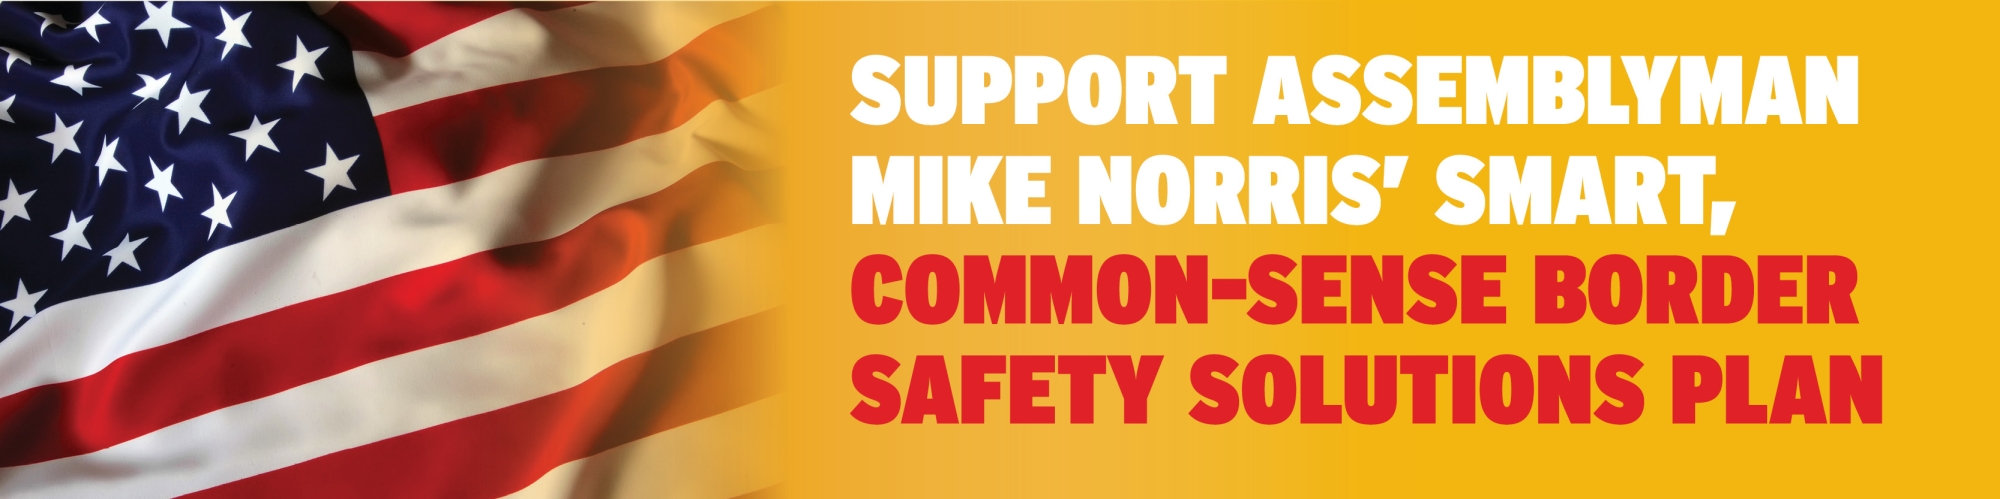 Support Assemblyman Mike Norris’ Smart, Common-Sense Border Safety Solutions Plan